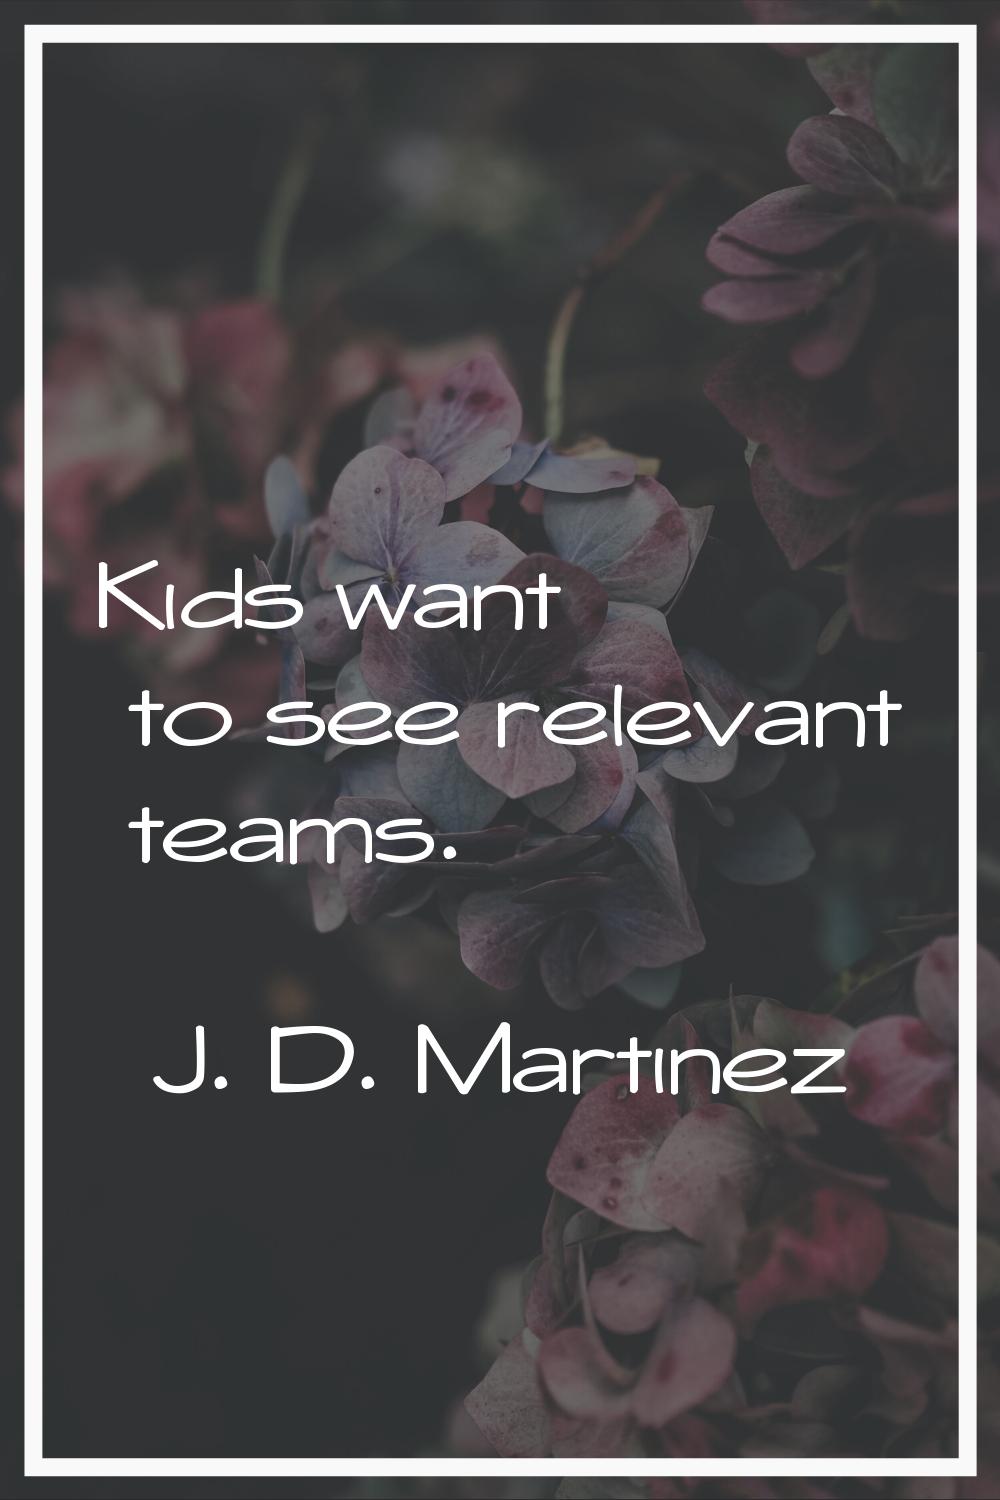 Kids want to see relevant teams.